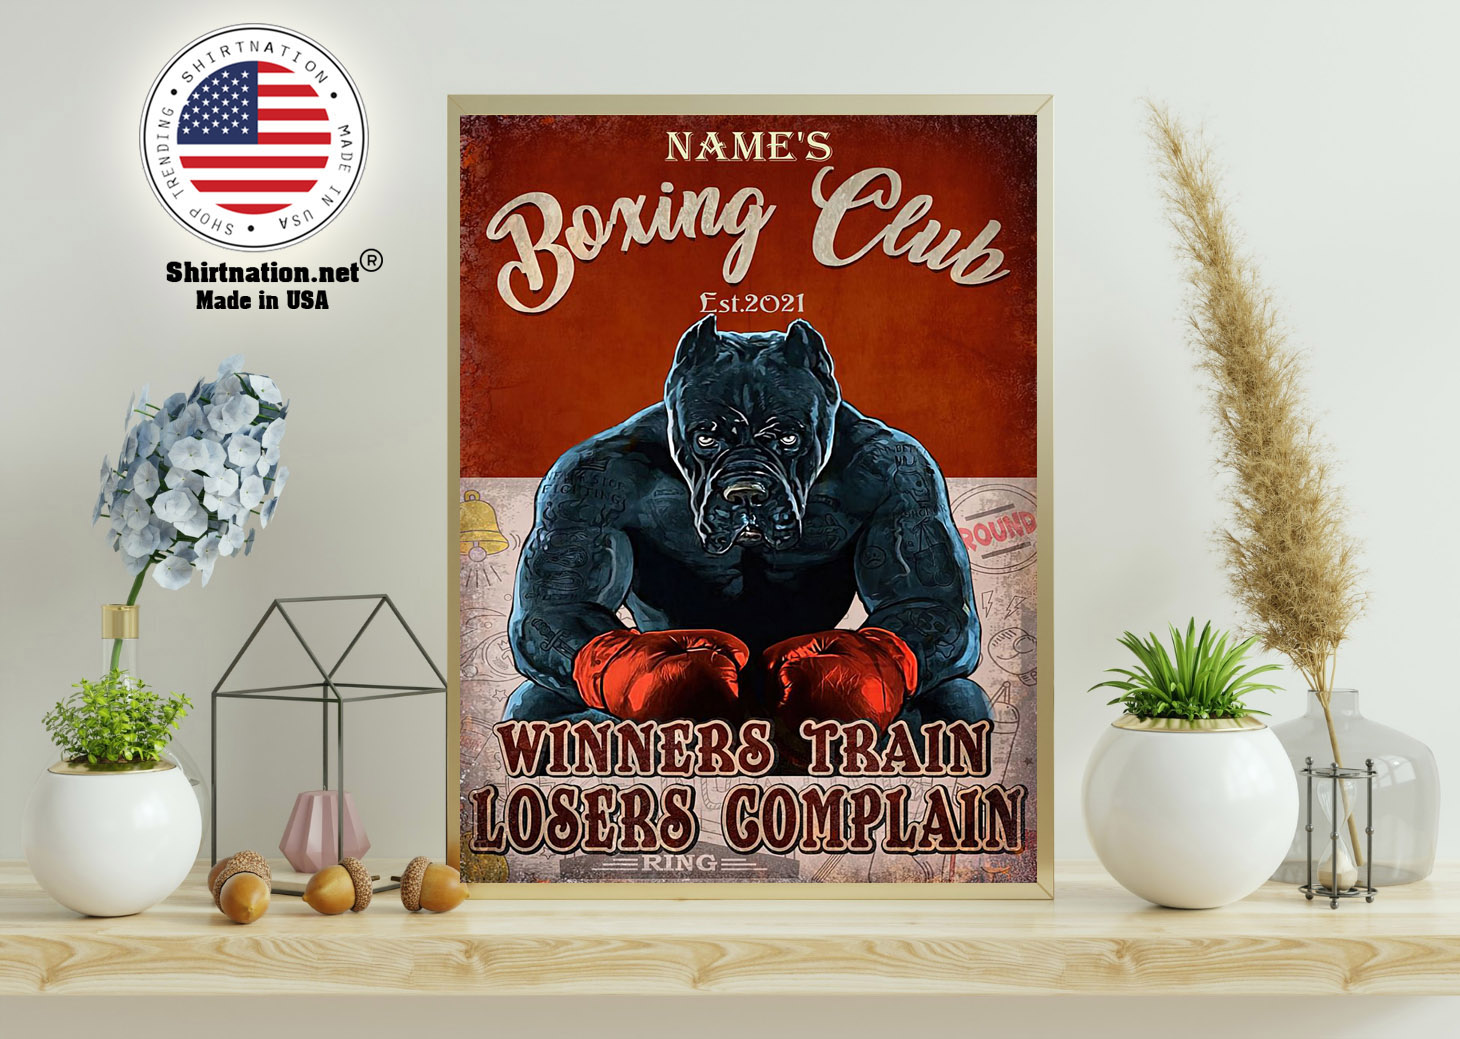 Boxing club winners train losers complain poster 11